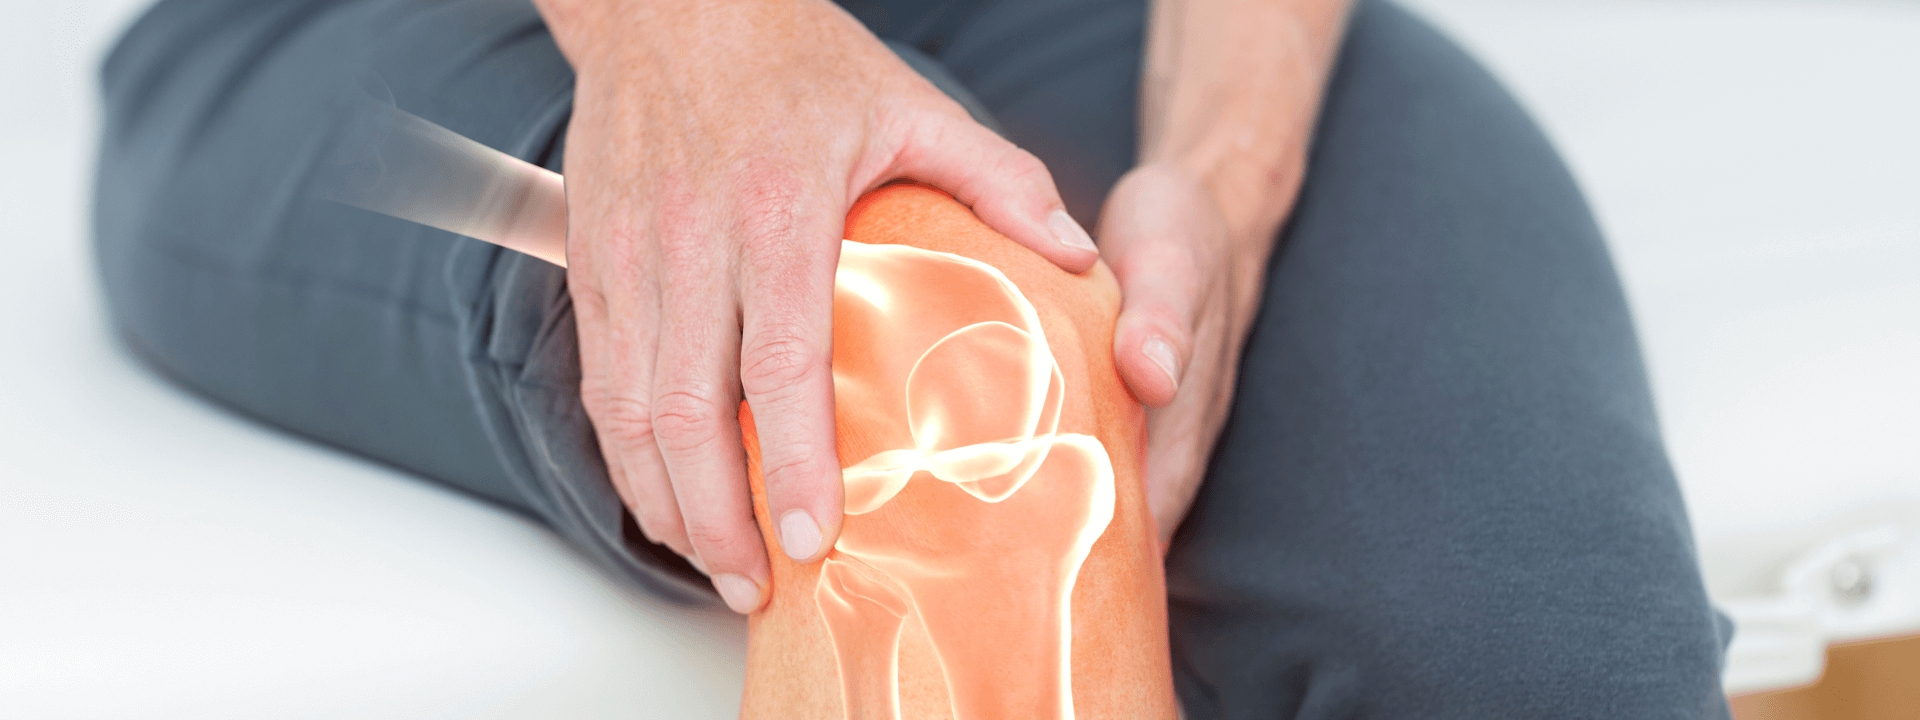 Relieve Joint Discomfort and Improve Mobility Naturally